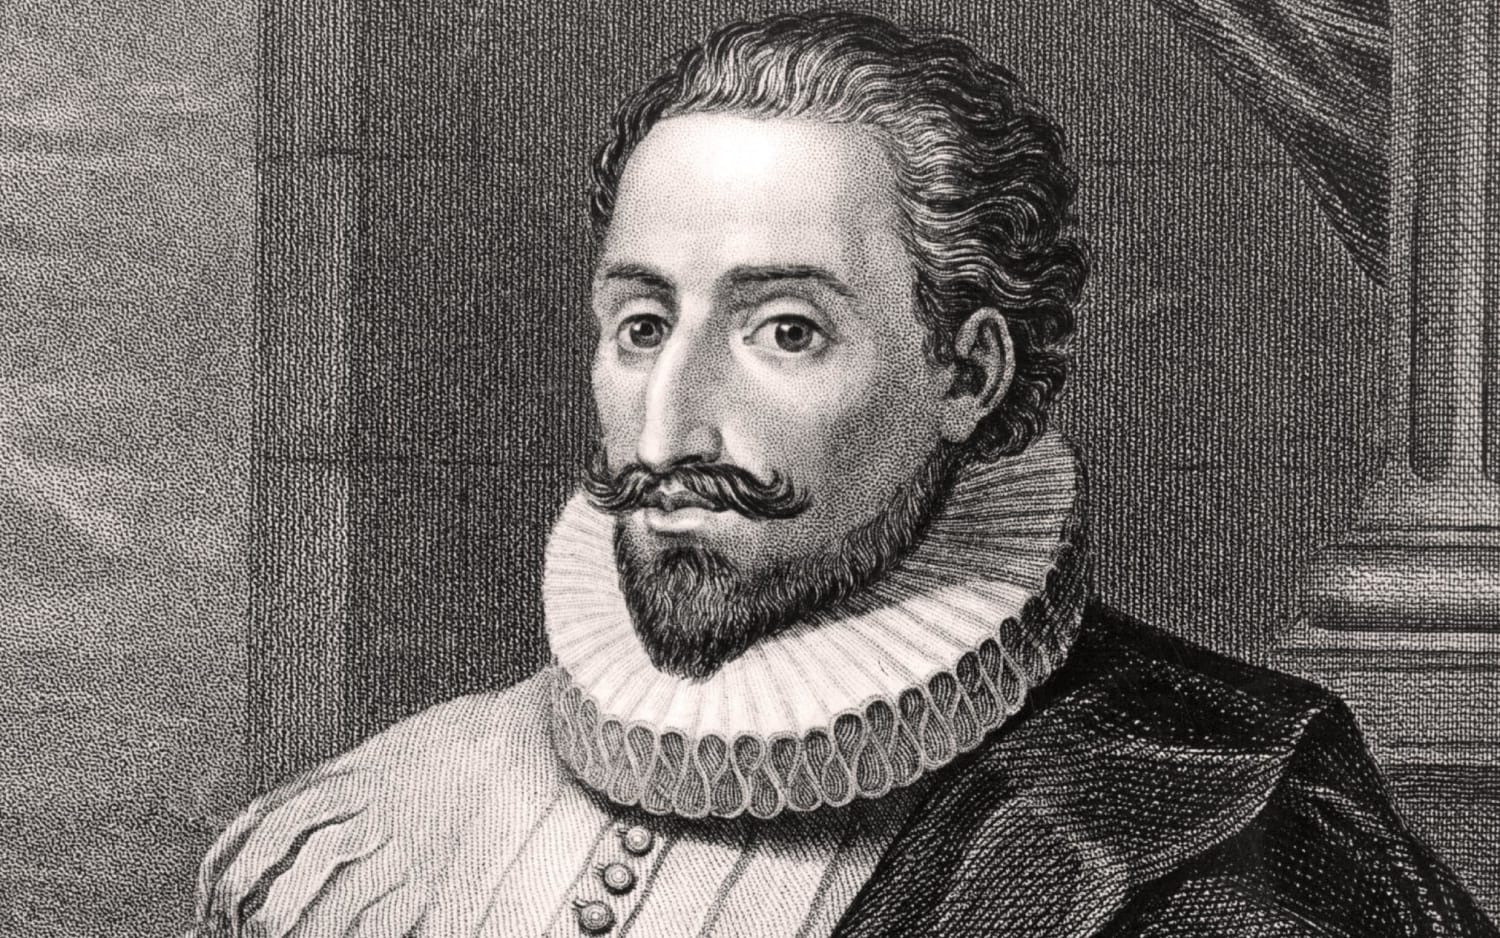 400 Years After His Death, Cervantes' Genius Lives on in 'Don Quixote'